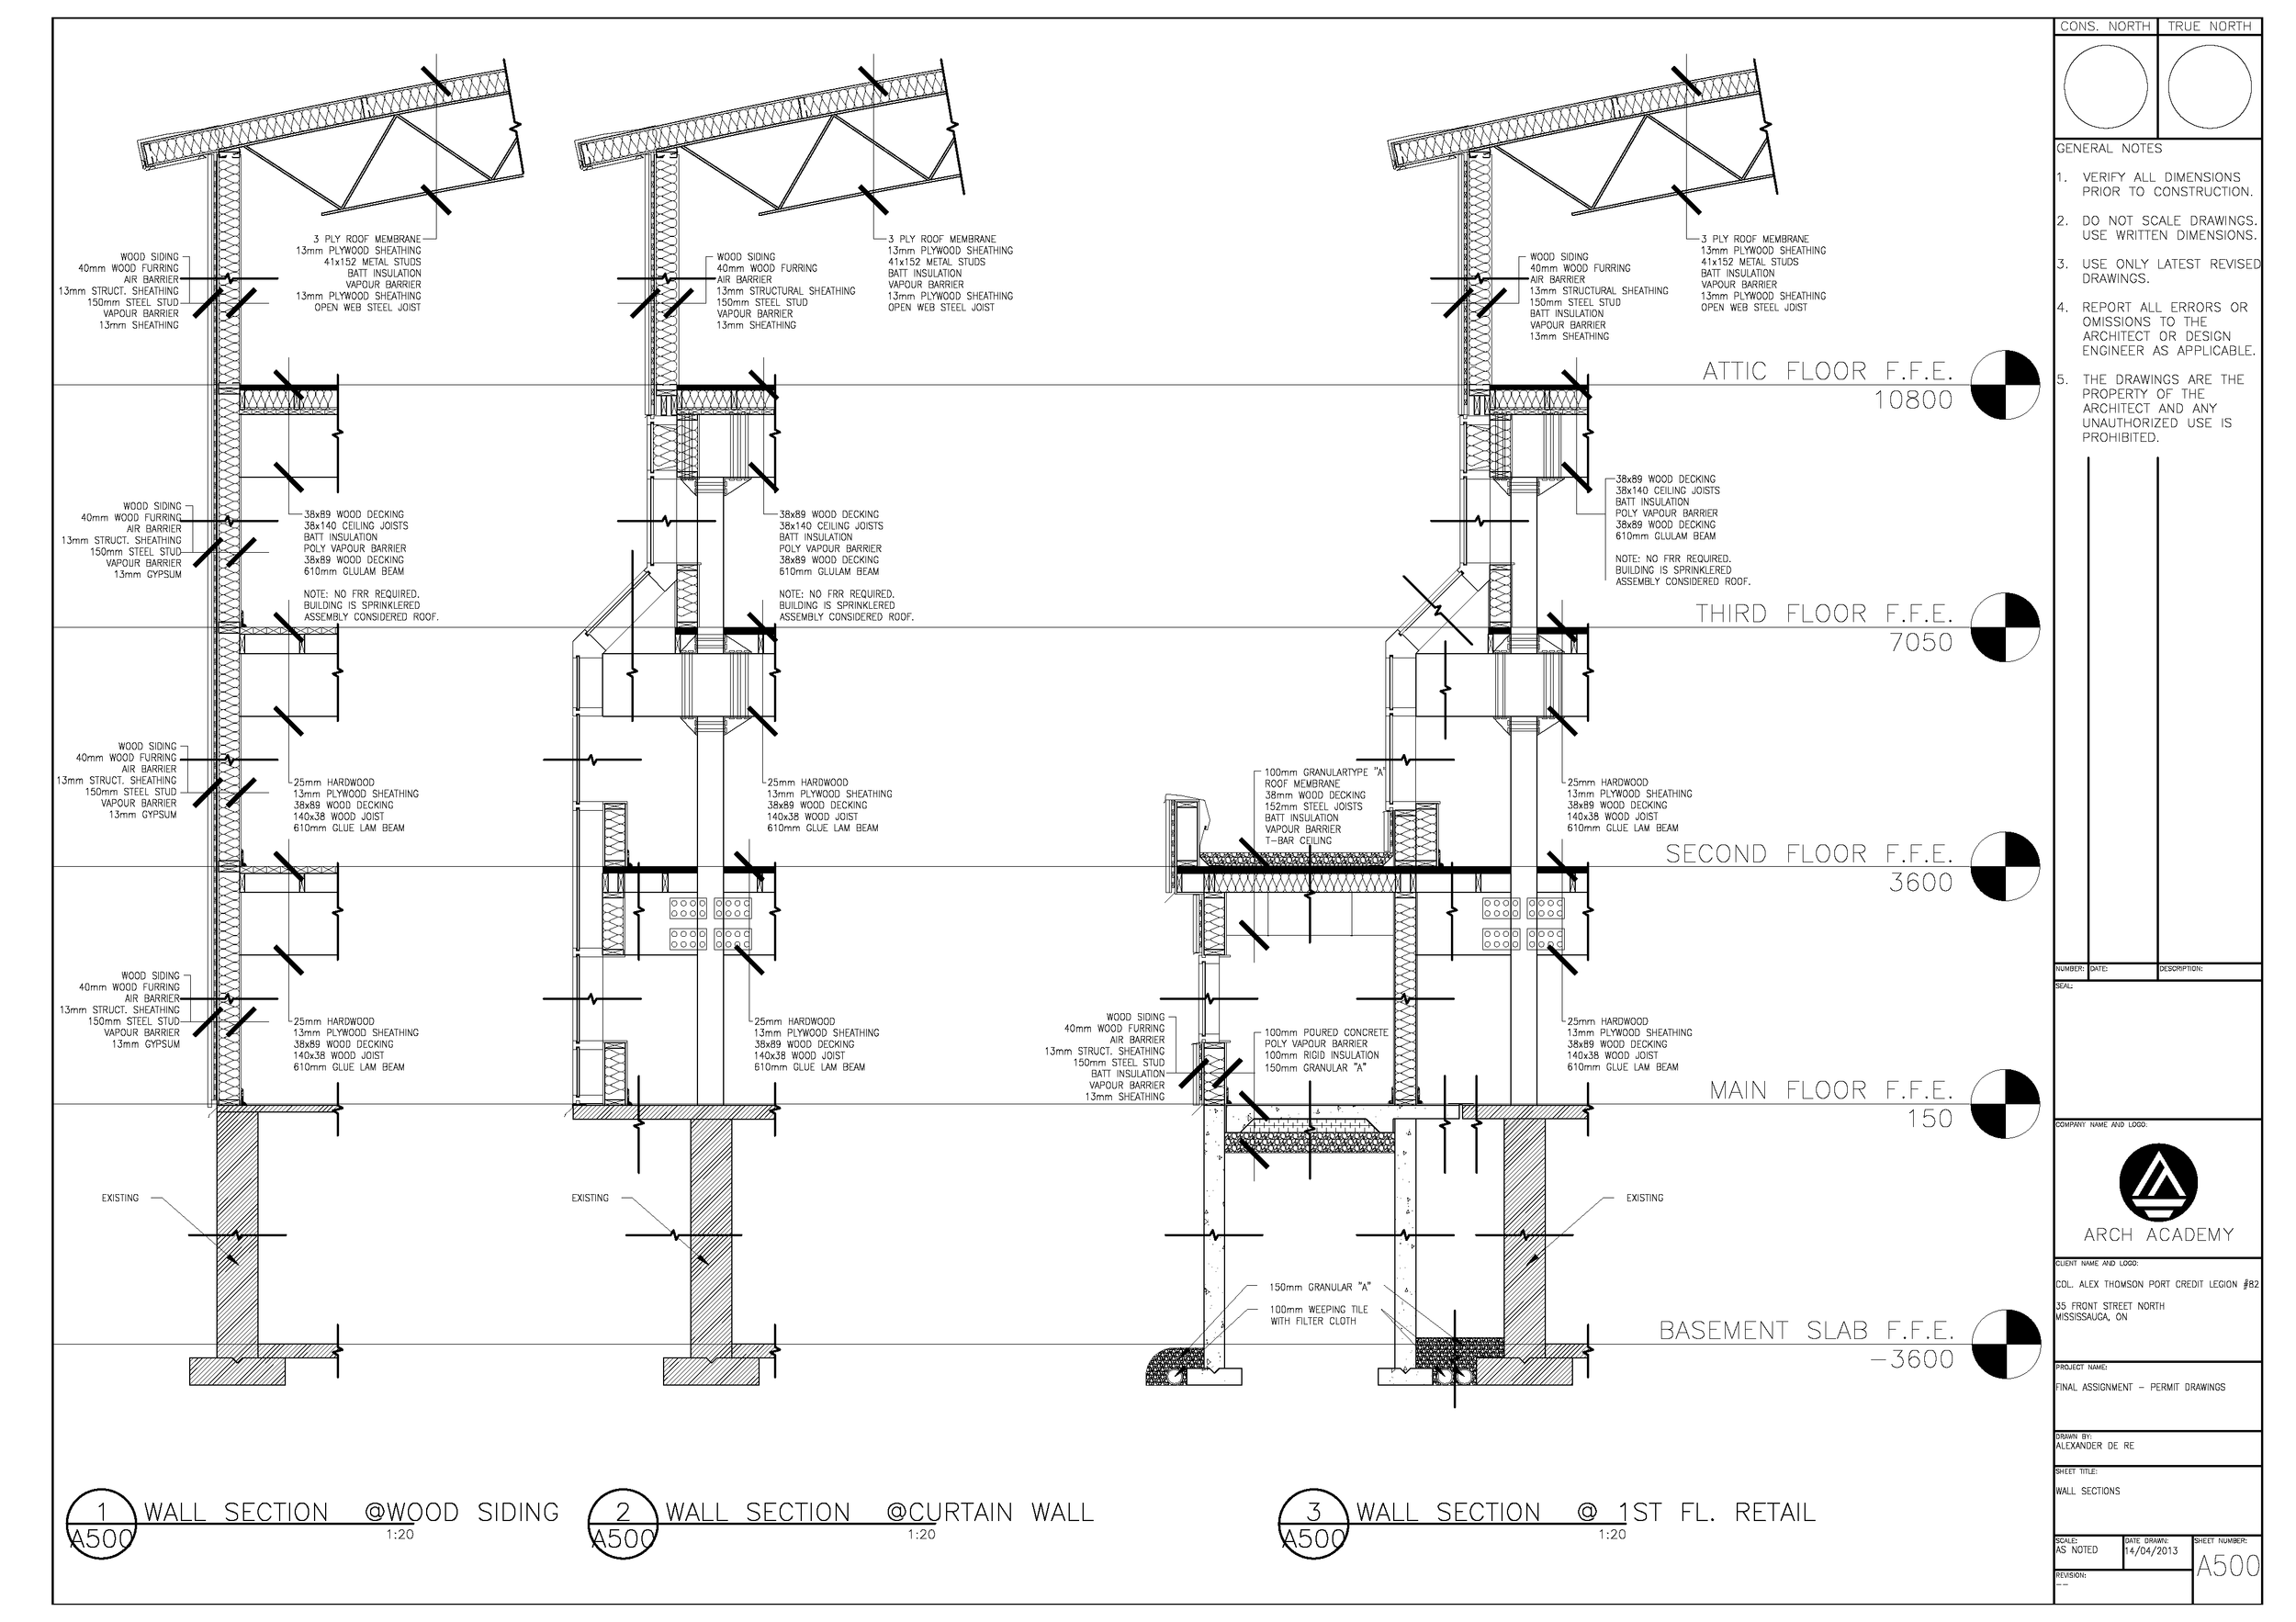 Wall Sections